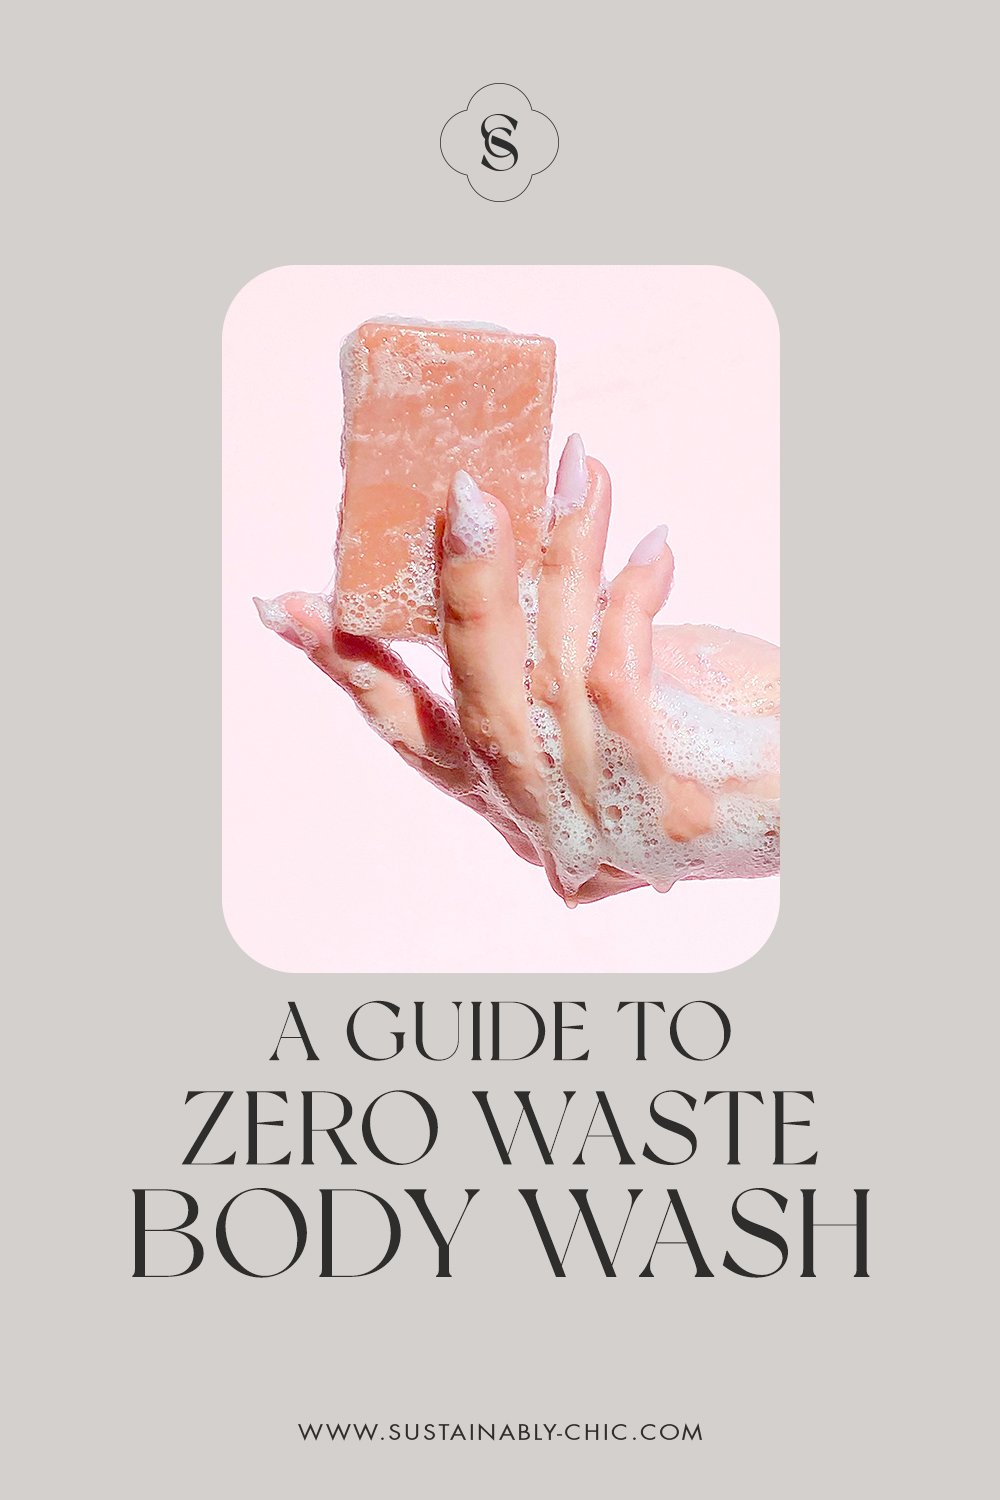 11 Eco-Friendly Body Wash Brands for a Zero Waste Shower — Sustainably Chic